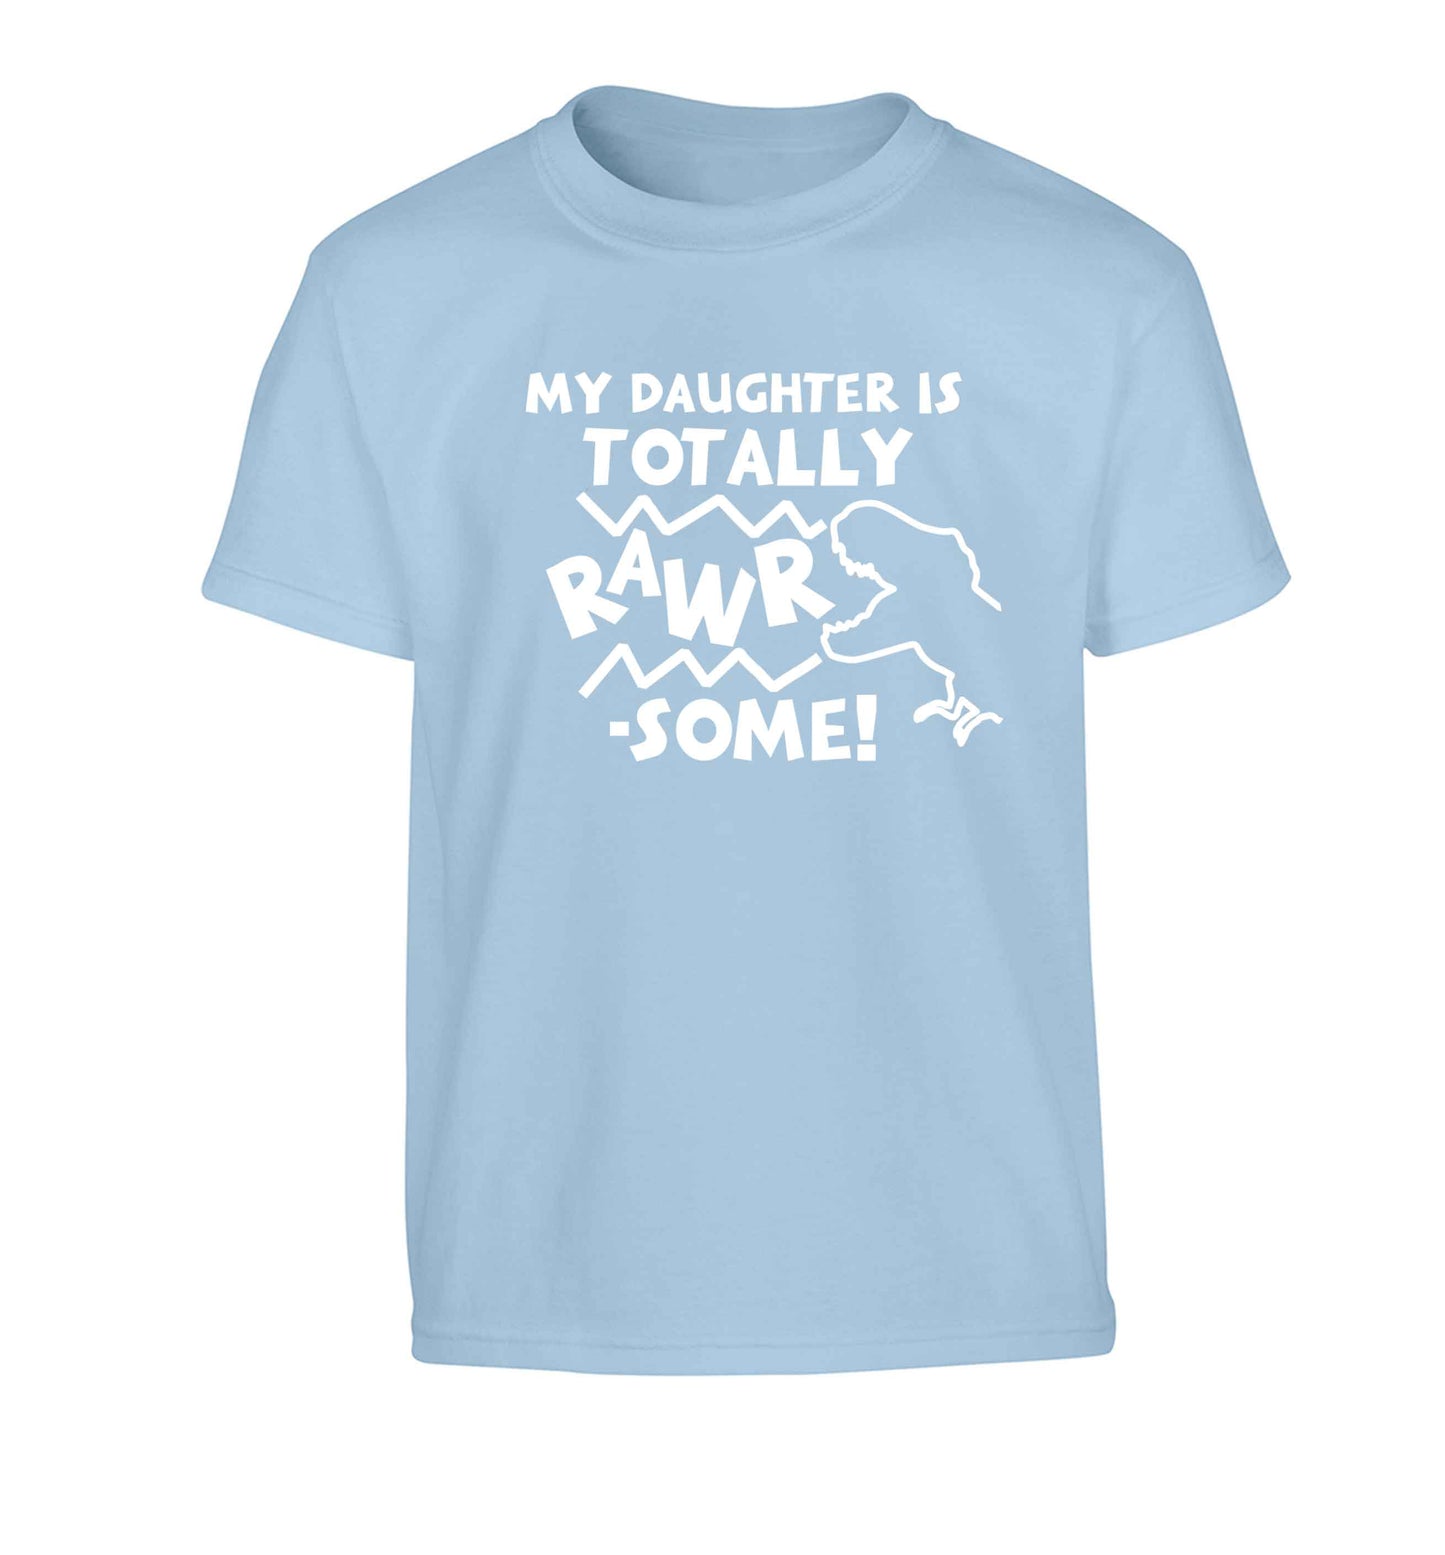 My daughter is totally rawrsome Children's light blue Tshirt 12-13 Years